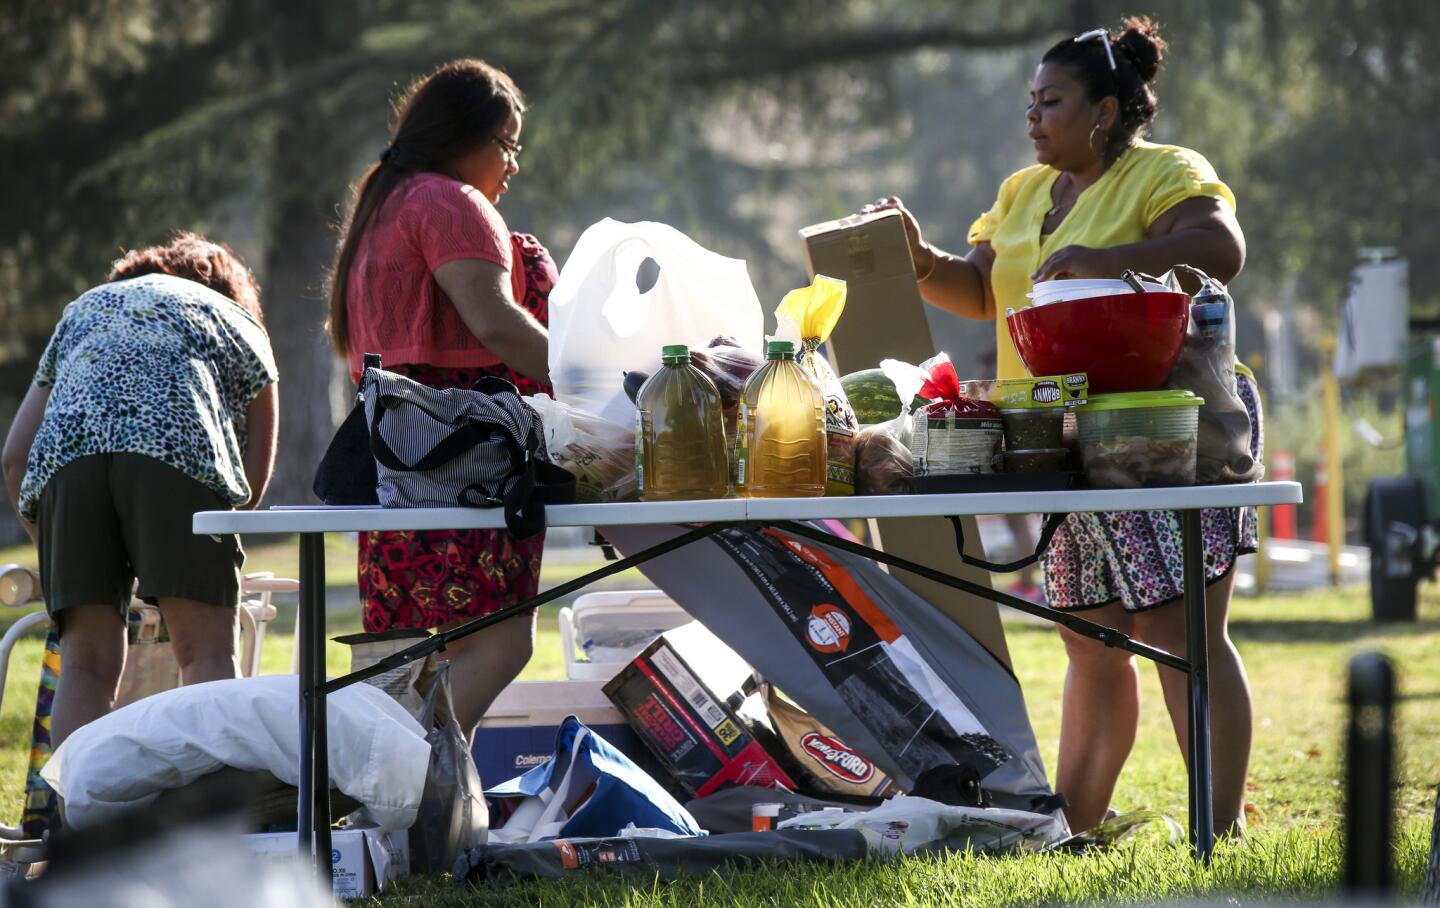 Cindy Esparza, second from left, and Elsa Elias set up a Fourth of July picnic after arriving at the Rose Bowl in Pasadena, where, come evening, there will be fireworks, music and more.